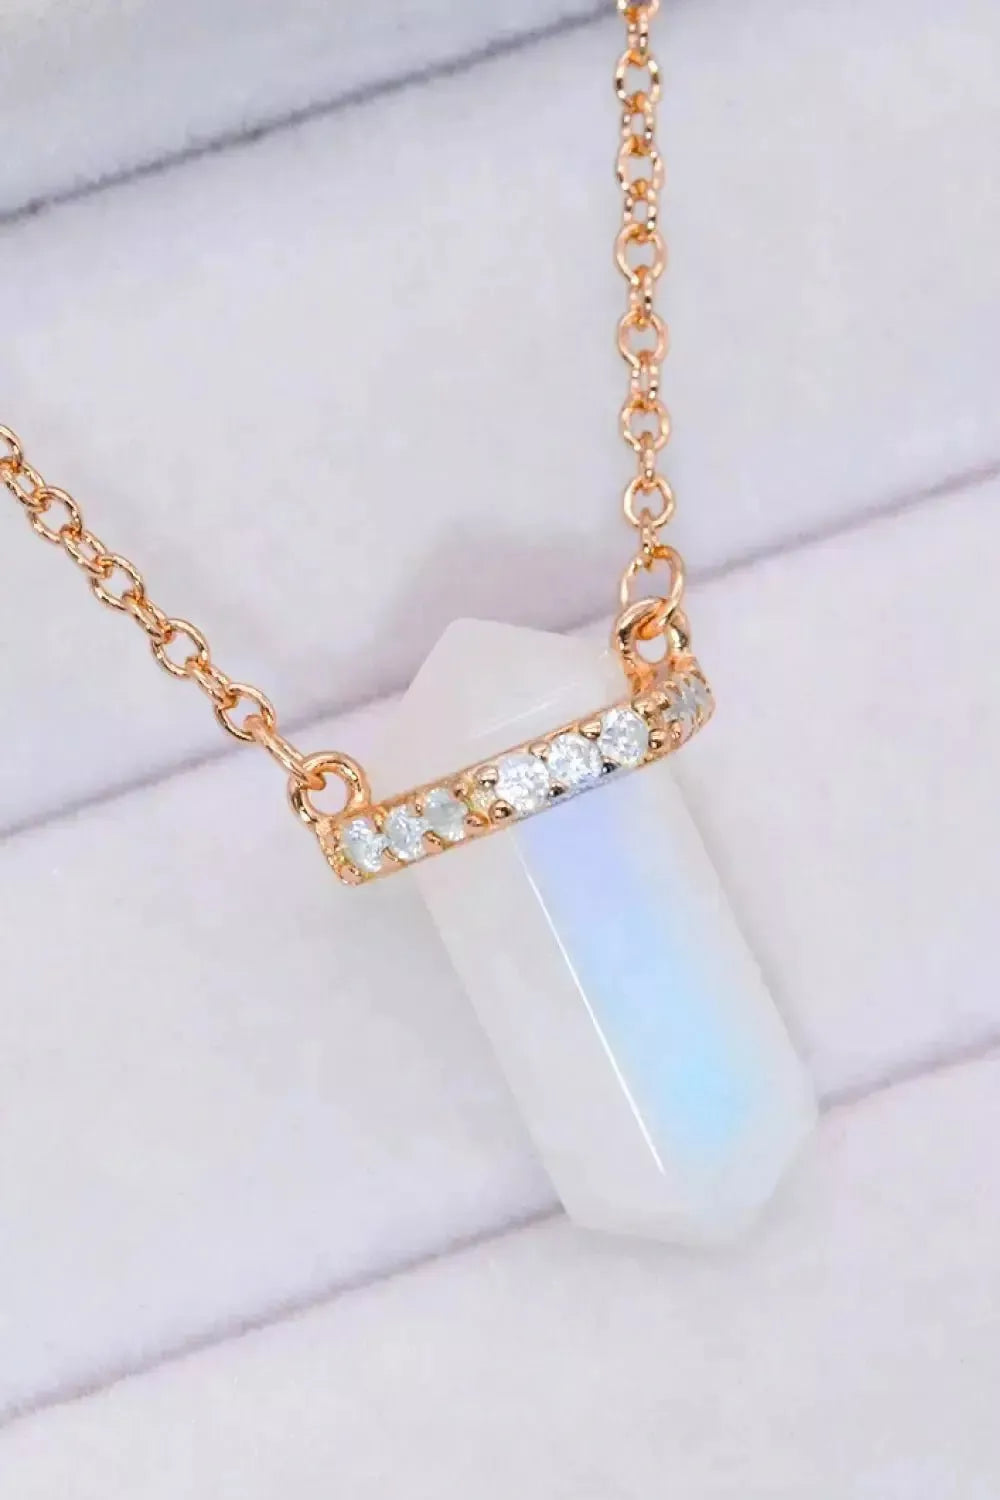 Natural Moonstone Chain-Link Necklace - Godiva Oya Bey